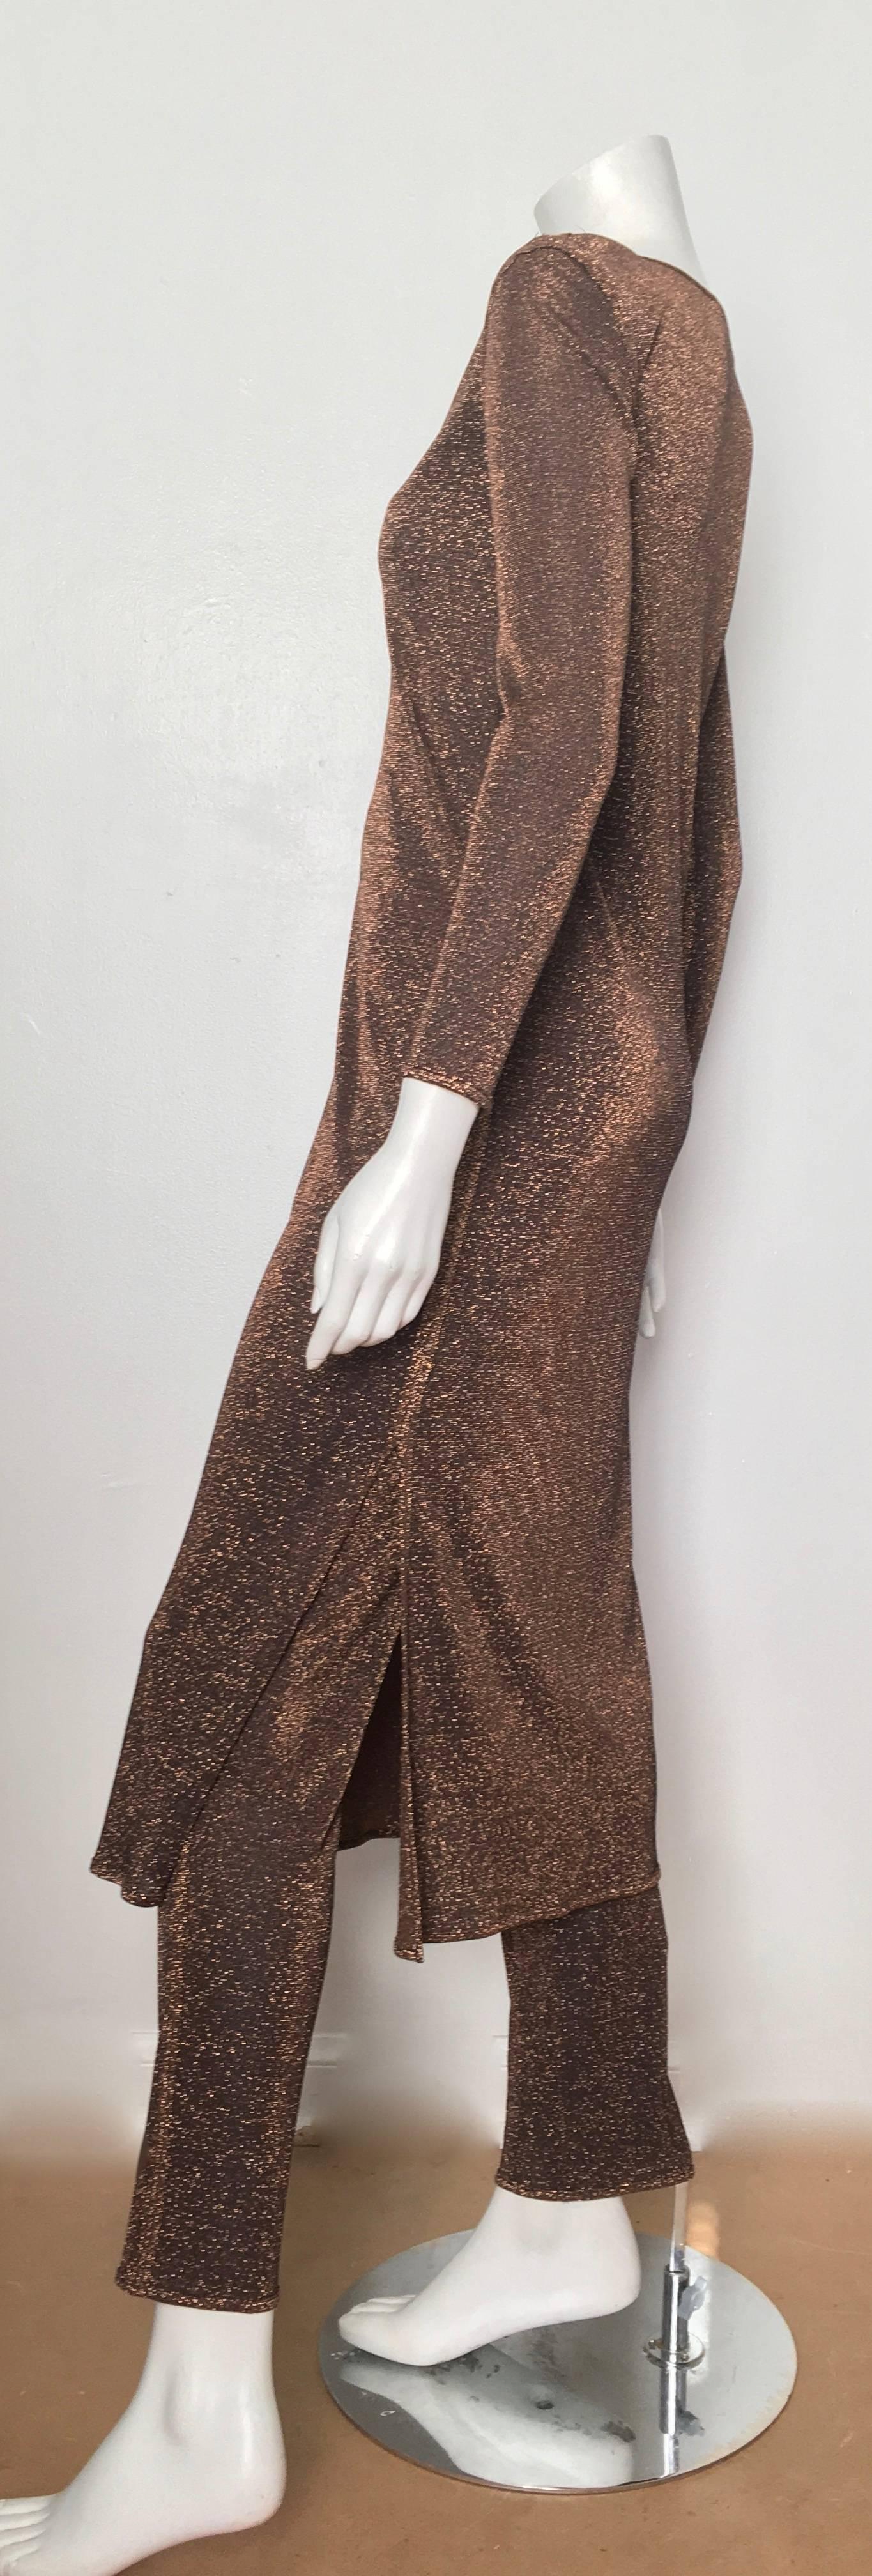 Richard Assatly 1980s Copper Bronze Metallic Fabric Dress with Pants Size 4. In Excellent Condition For Sale In Atlanta, GA